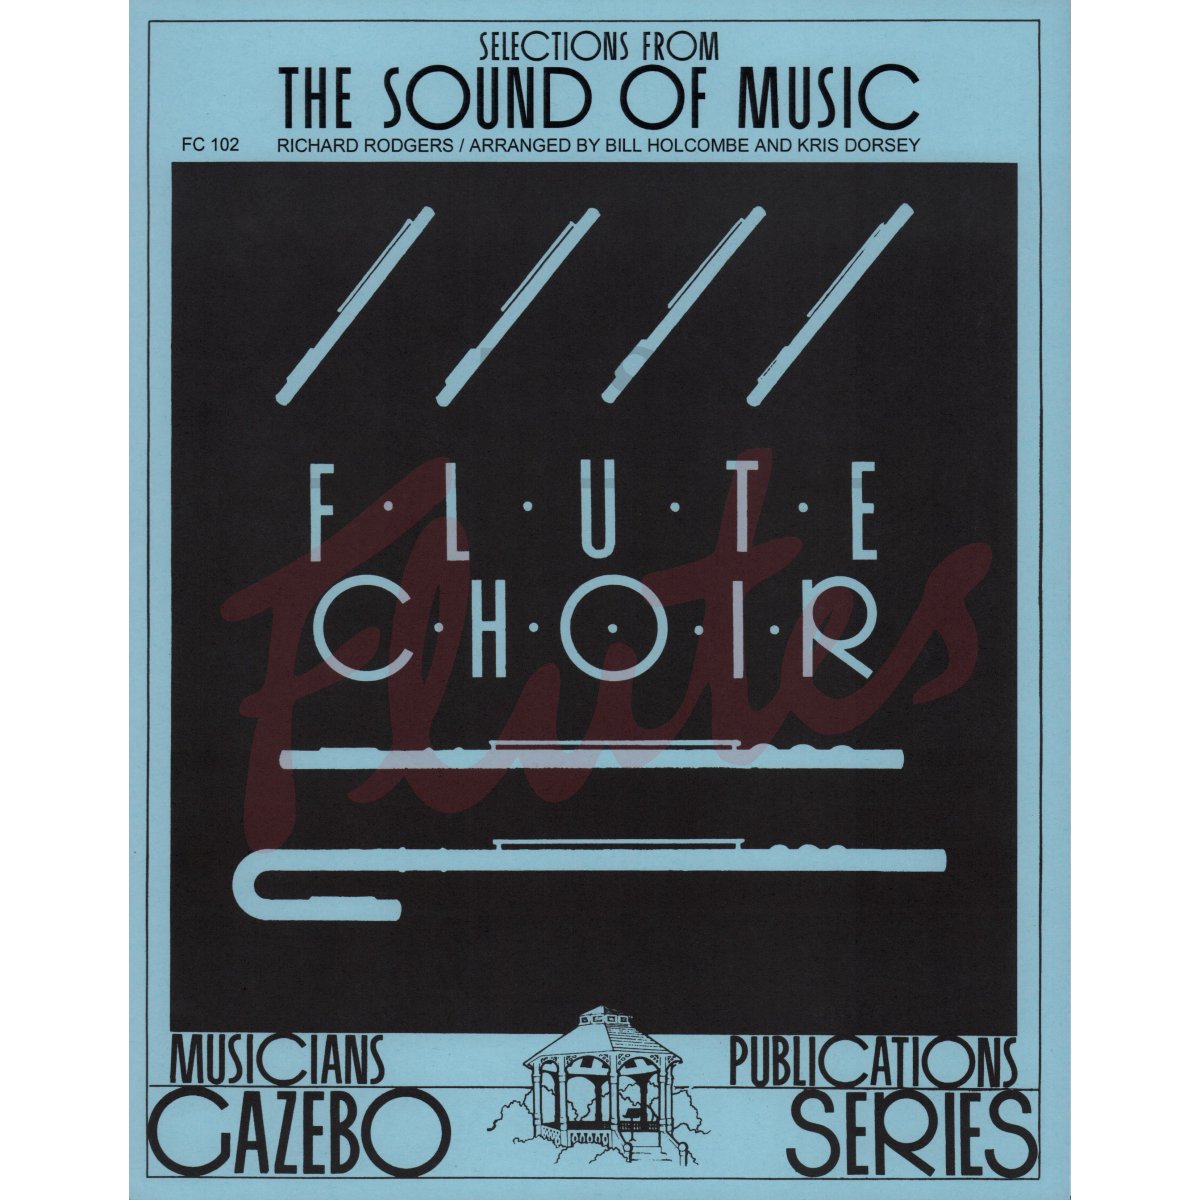 Selections from The Sound of Music for Flute Choir